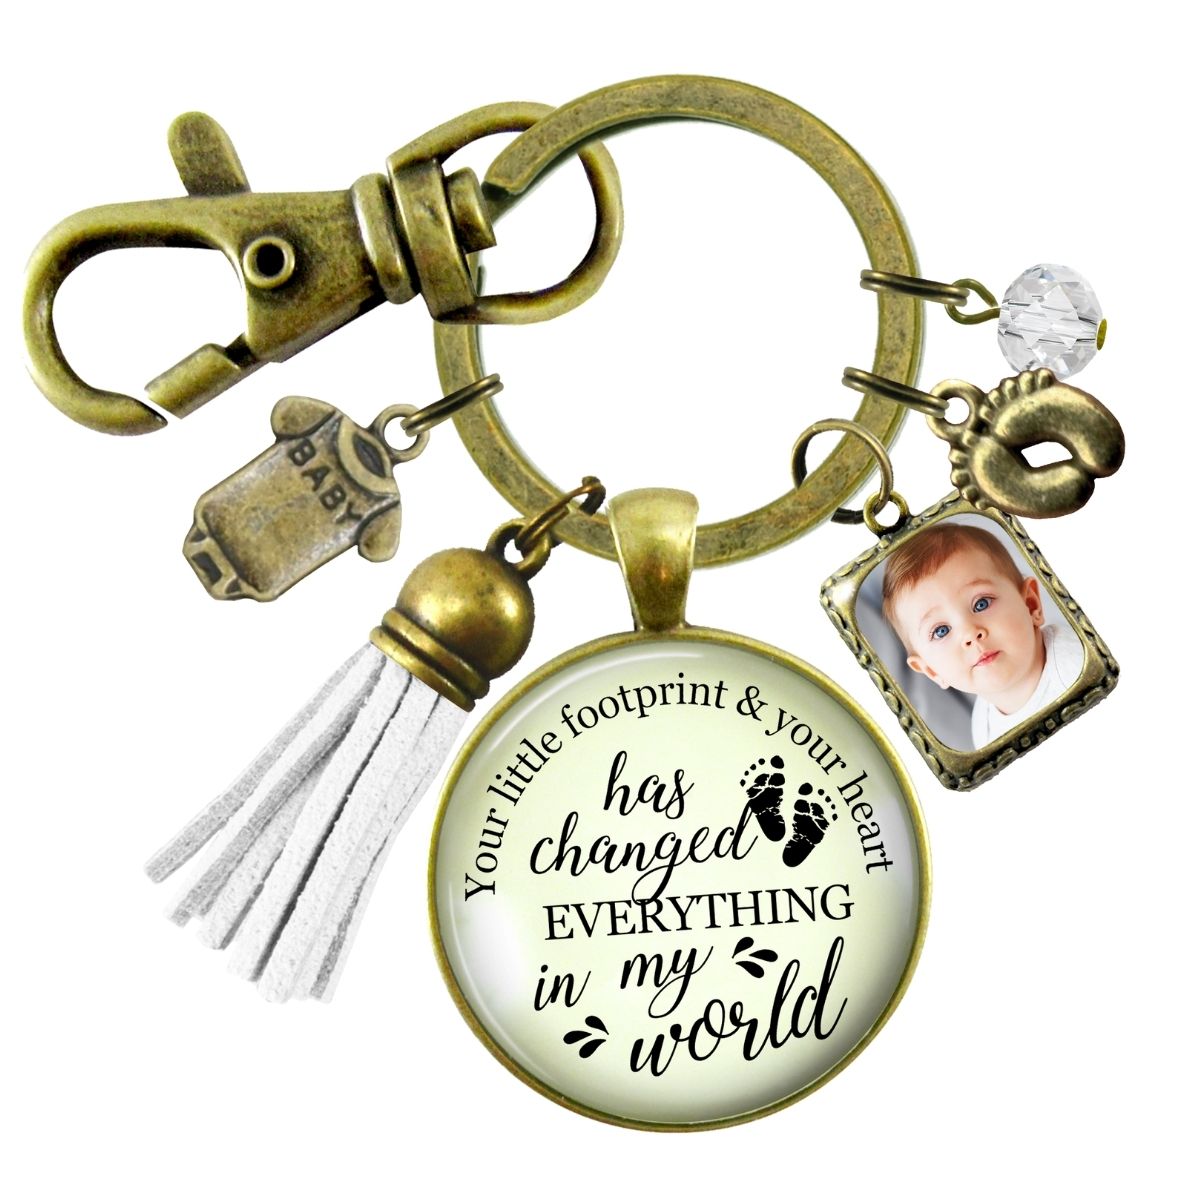 Handmade Gutsy Goodness Jewelry New Mom Keychain Your Little Footprint Gift Baby Feet & Photo Frame Charm, DIY Picture Template